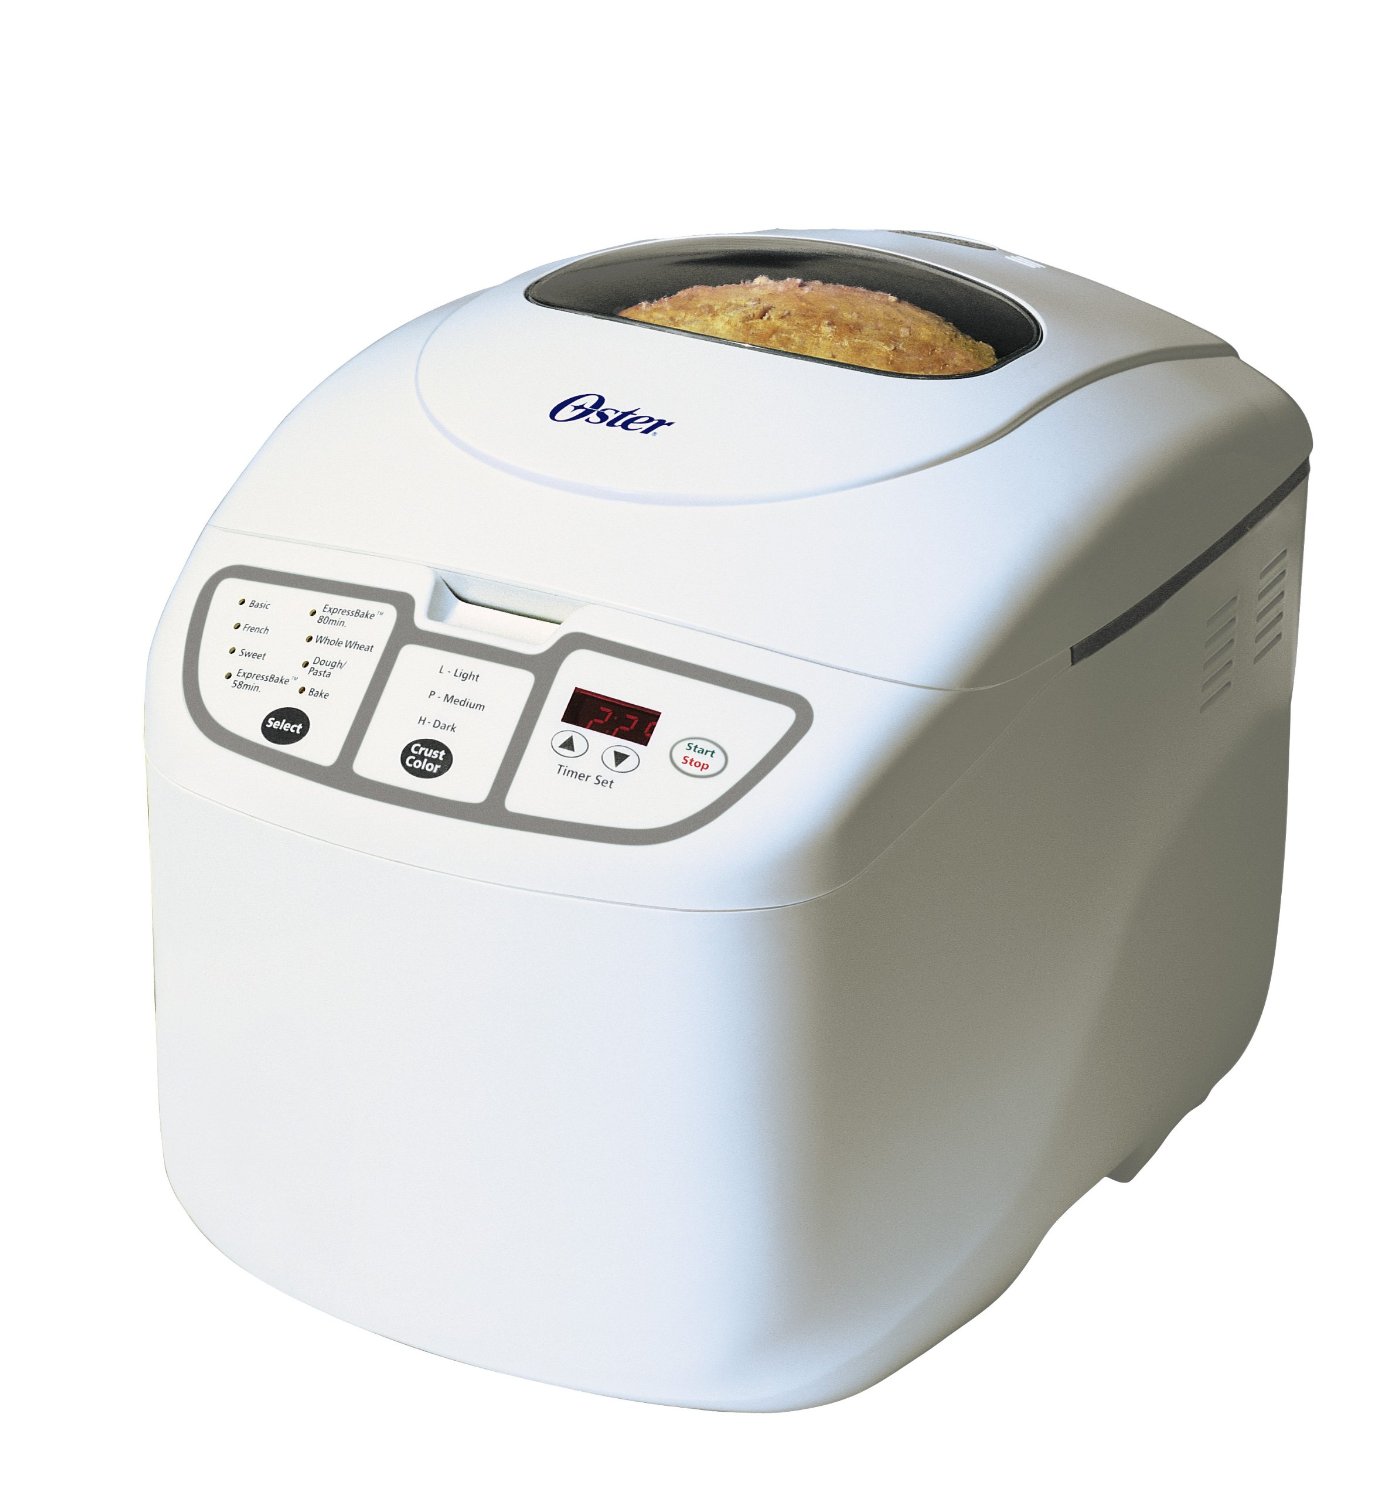 Caring for Your Bread Machine